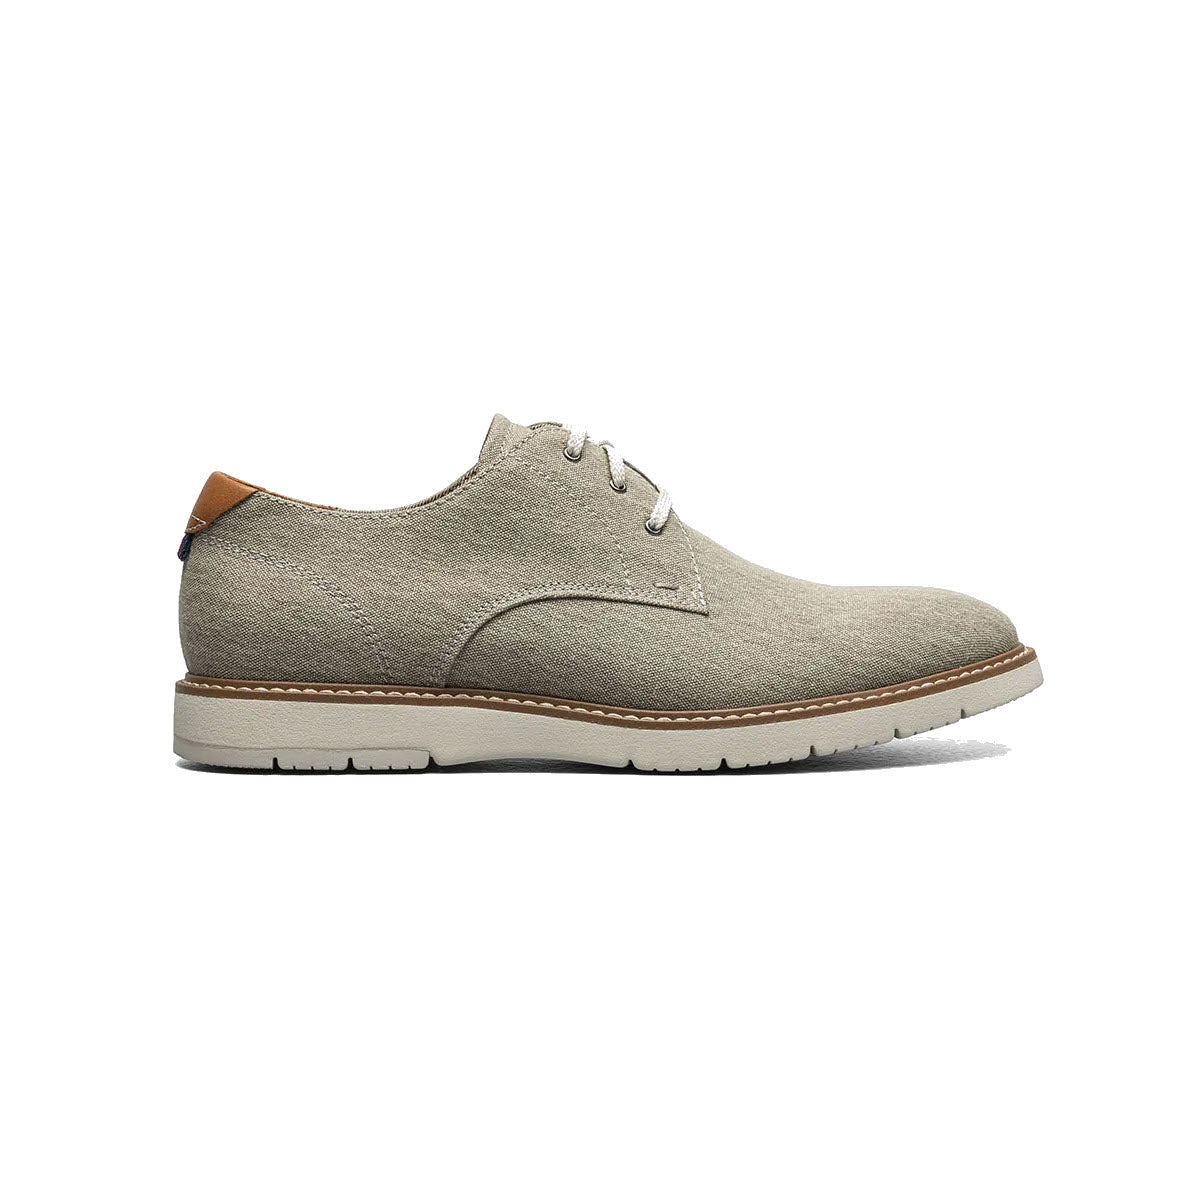 Side view of a light gray Florsheim men&#39;s Vibe Canvas Plain Toe Oxford shoe with tan leather trim and white soles against a white background.